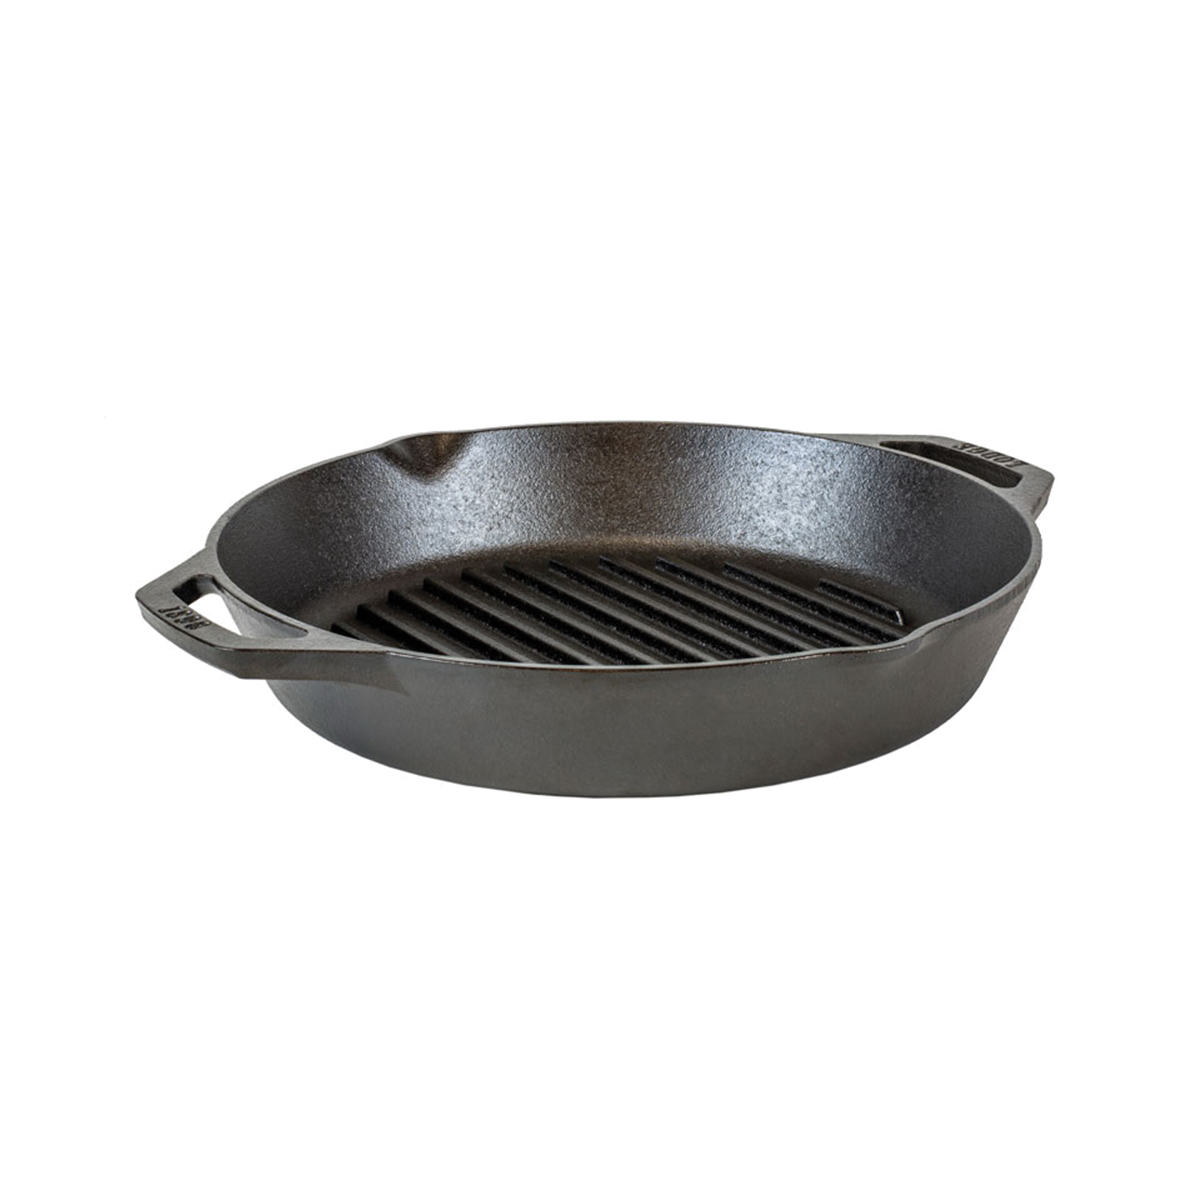 L10GPL Grill Pan, 12 in Dia, Iron, Black, Round, Iron Handle, Dual Handle